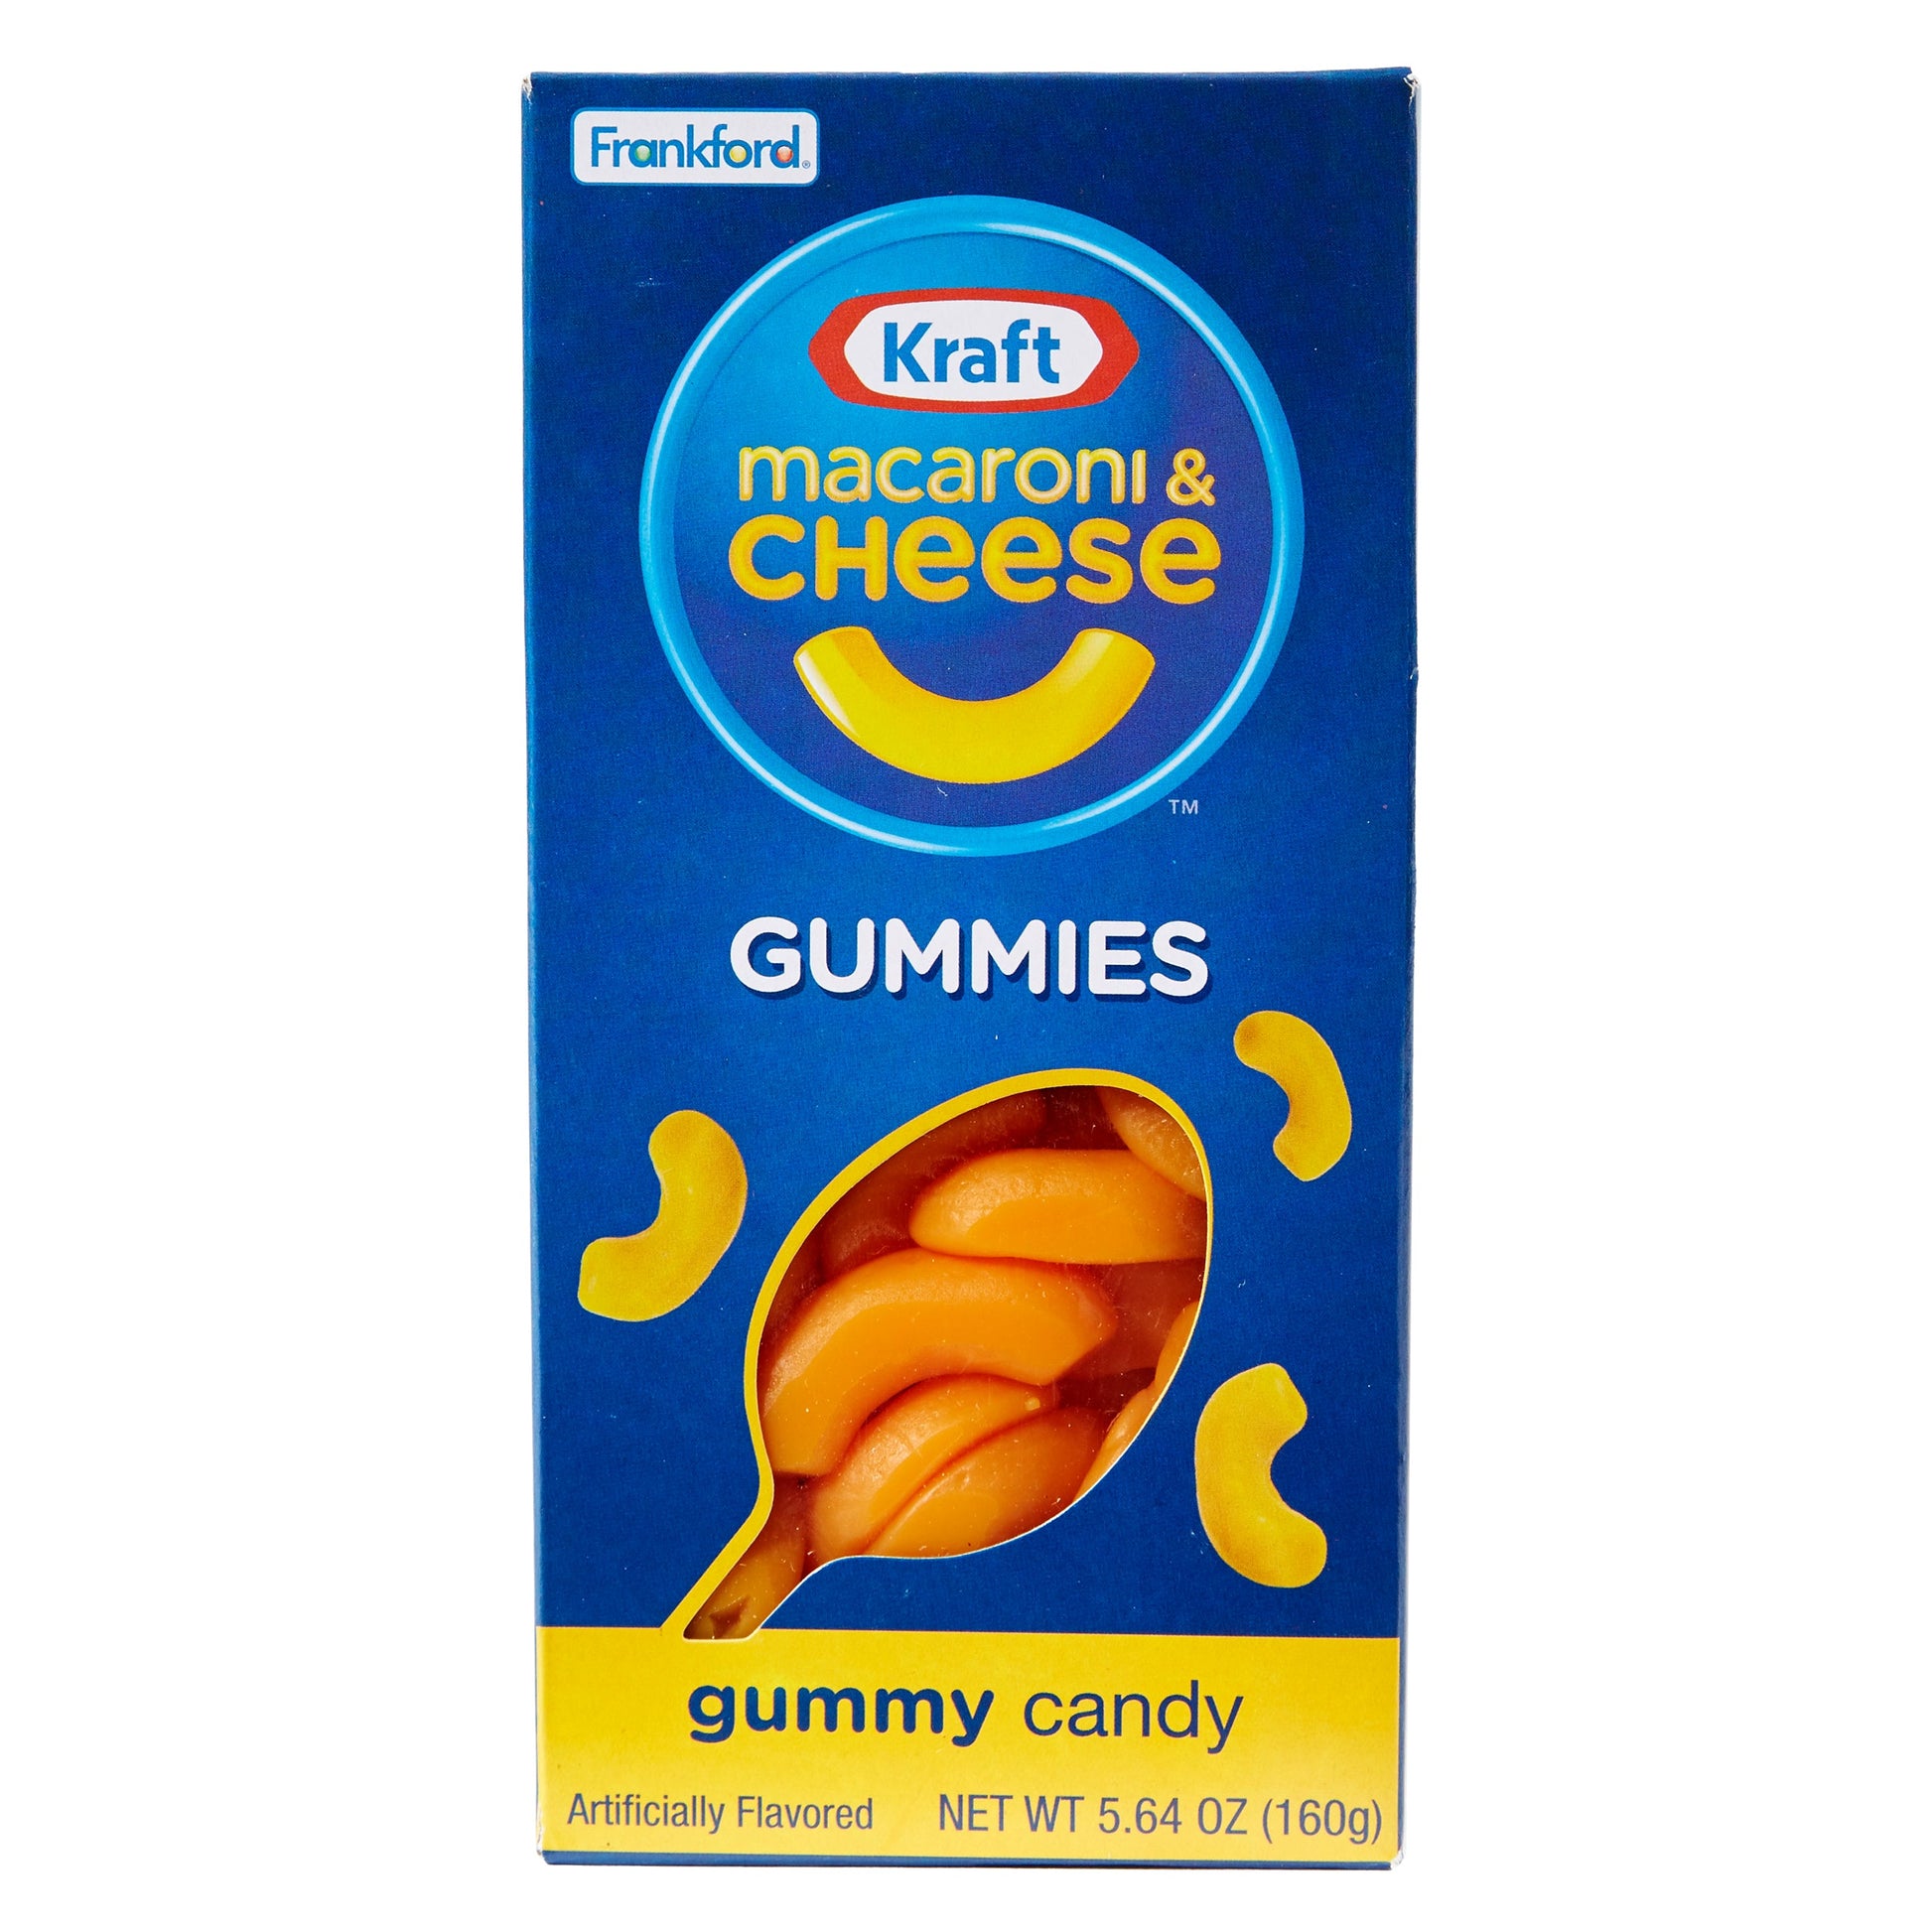 Kraft Macaroni & Cheese Gummies, 3pk, 16.92 oz, Fruit Flavored, by Frankford Candy